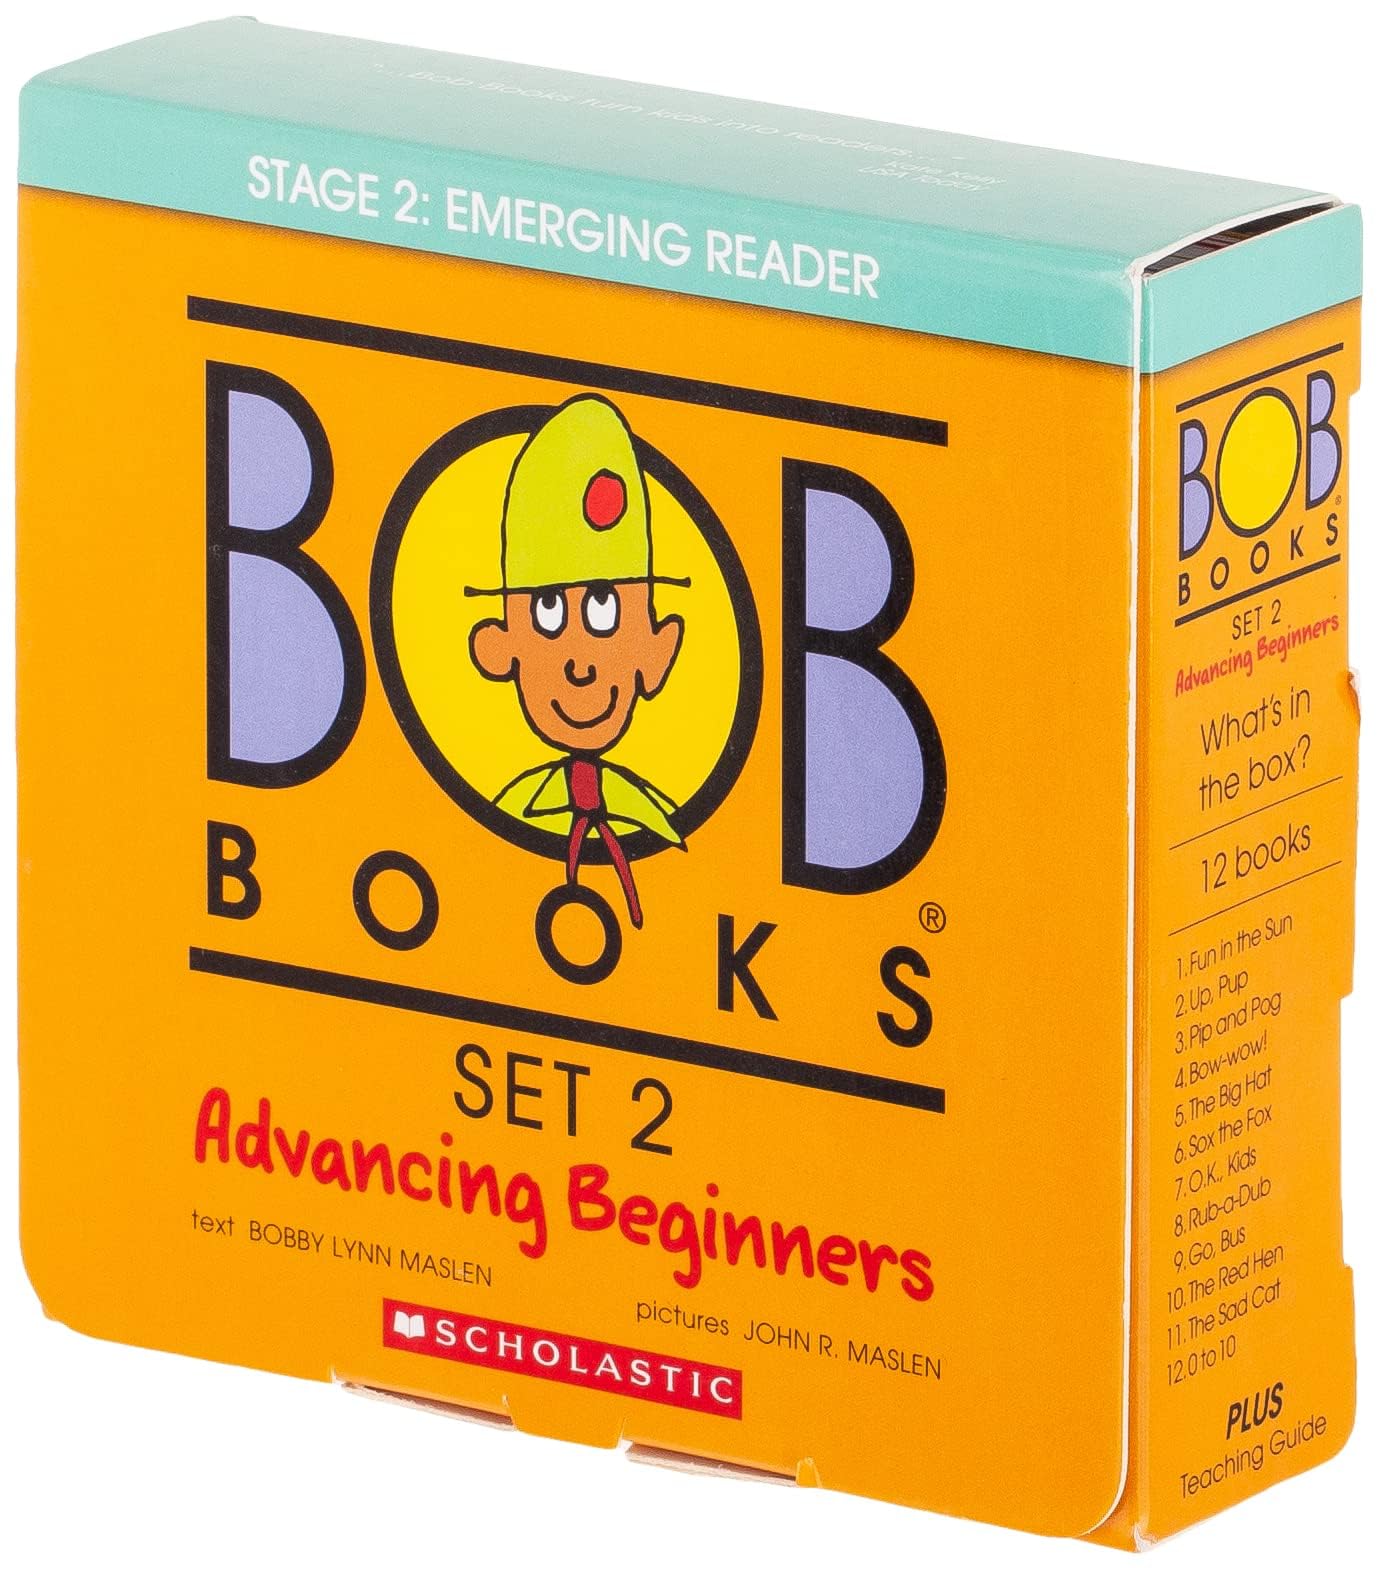 Bob Books - Advancing Beginners Box Set Phonics, Ages 4 and Up, Kindergarten (Stage 2: Emerging Reader): 8 Books for Young Readers (Bob Books)